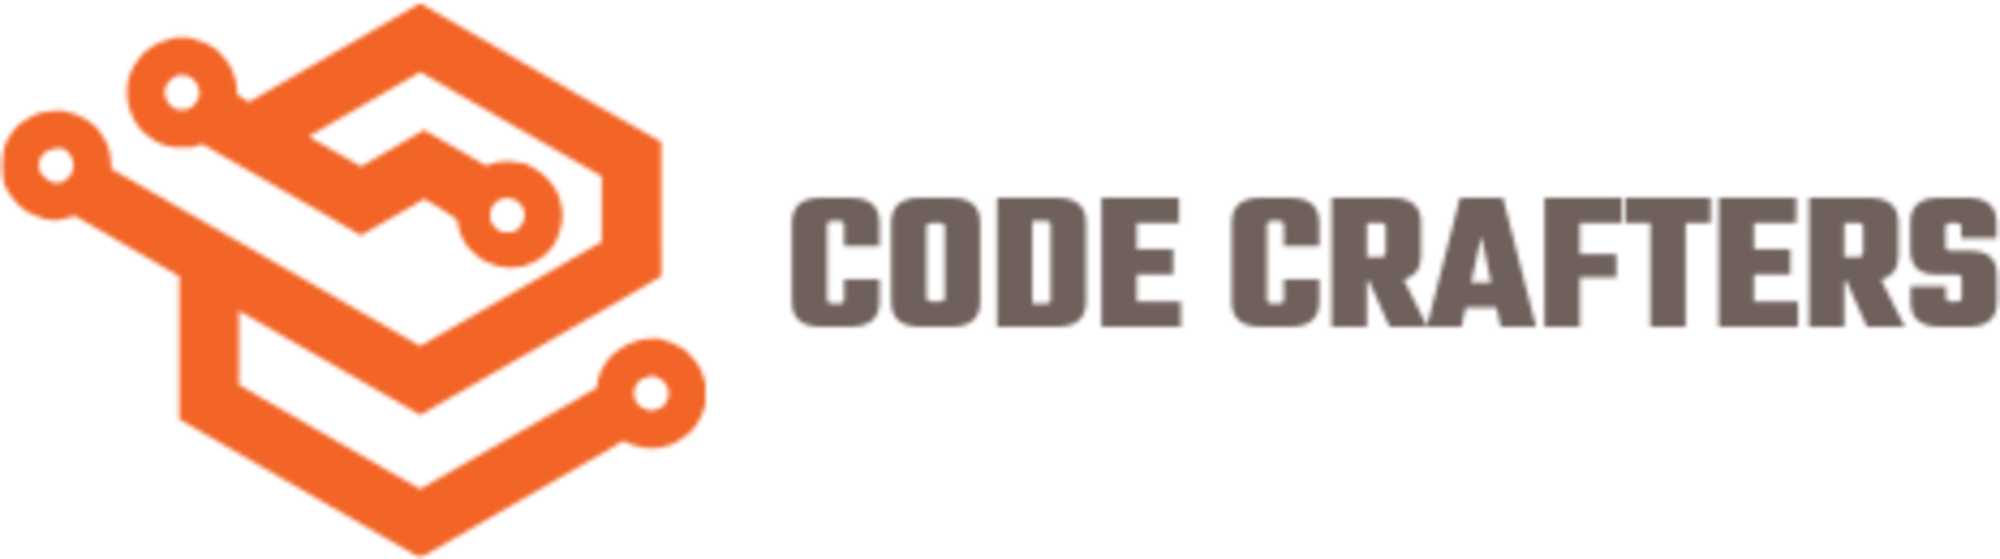 Code Crafters Logo